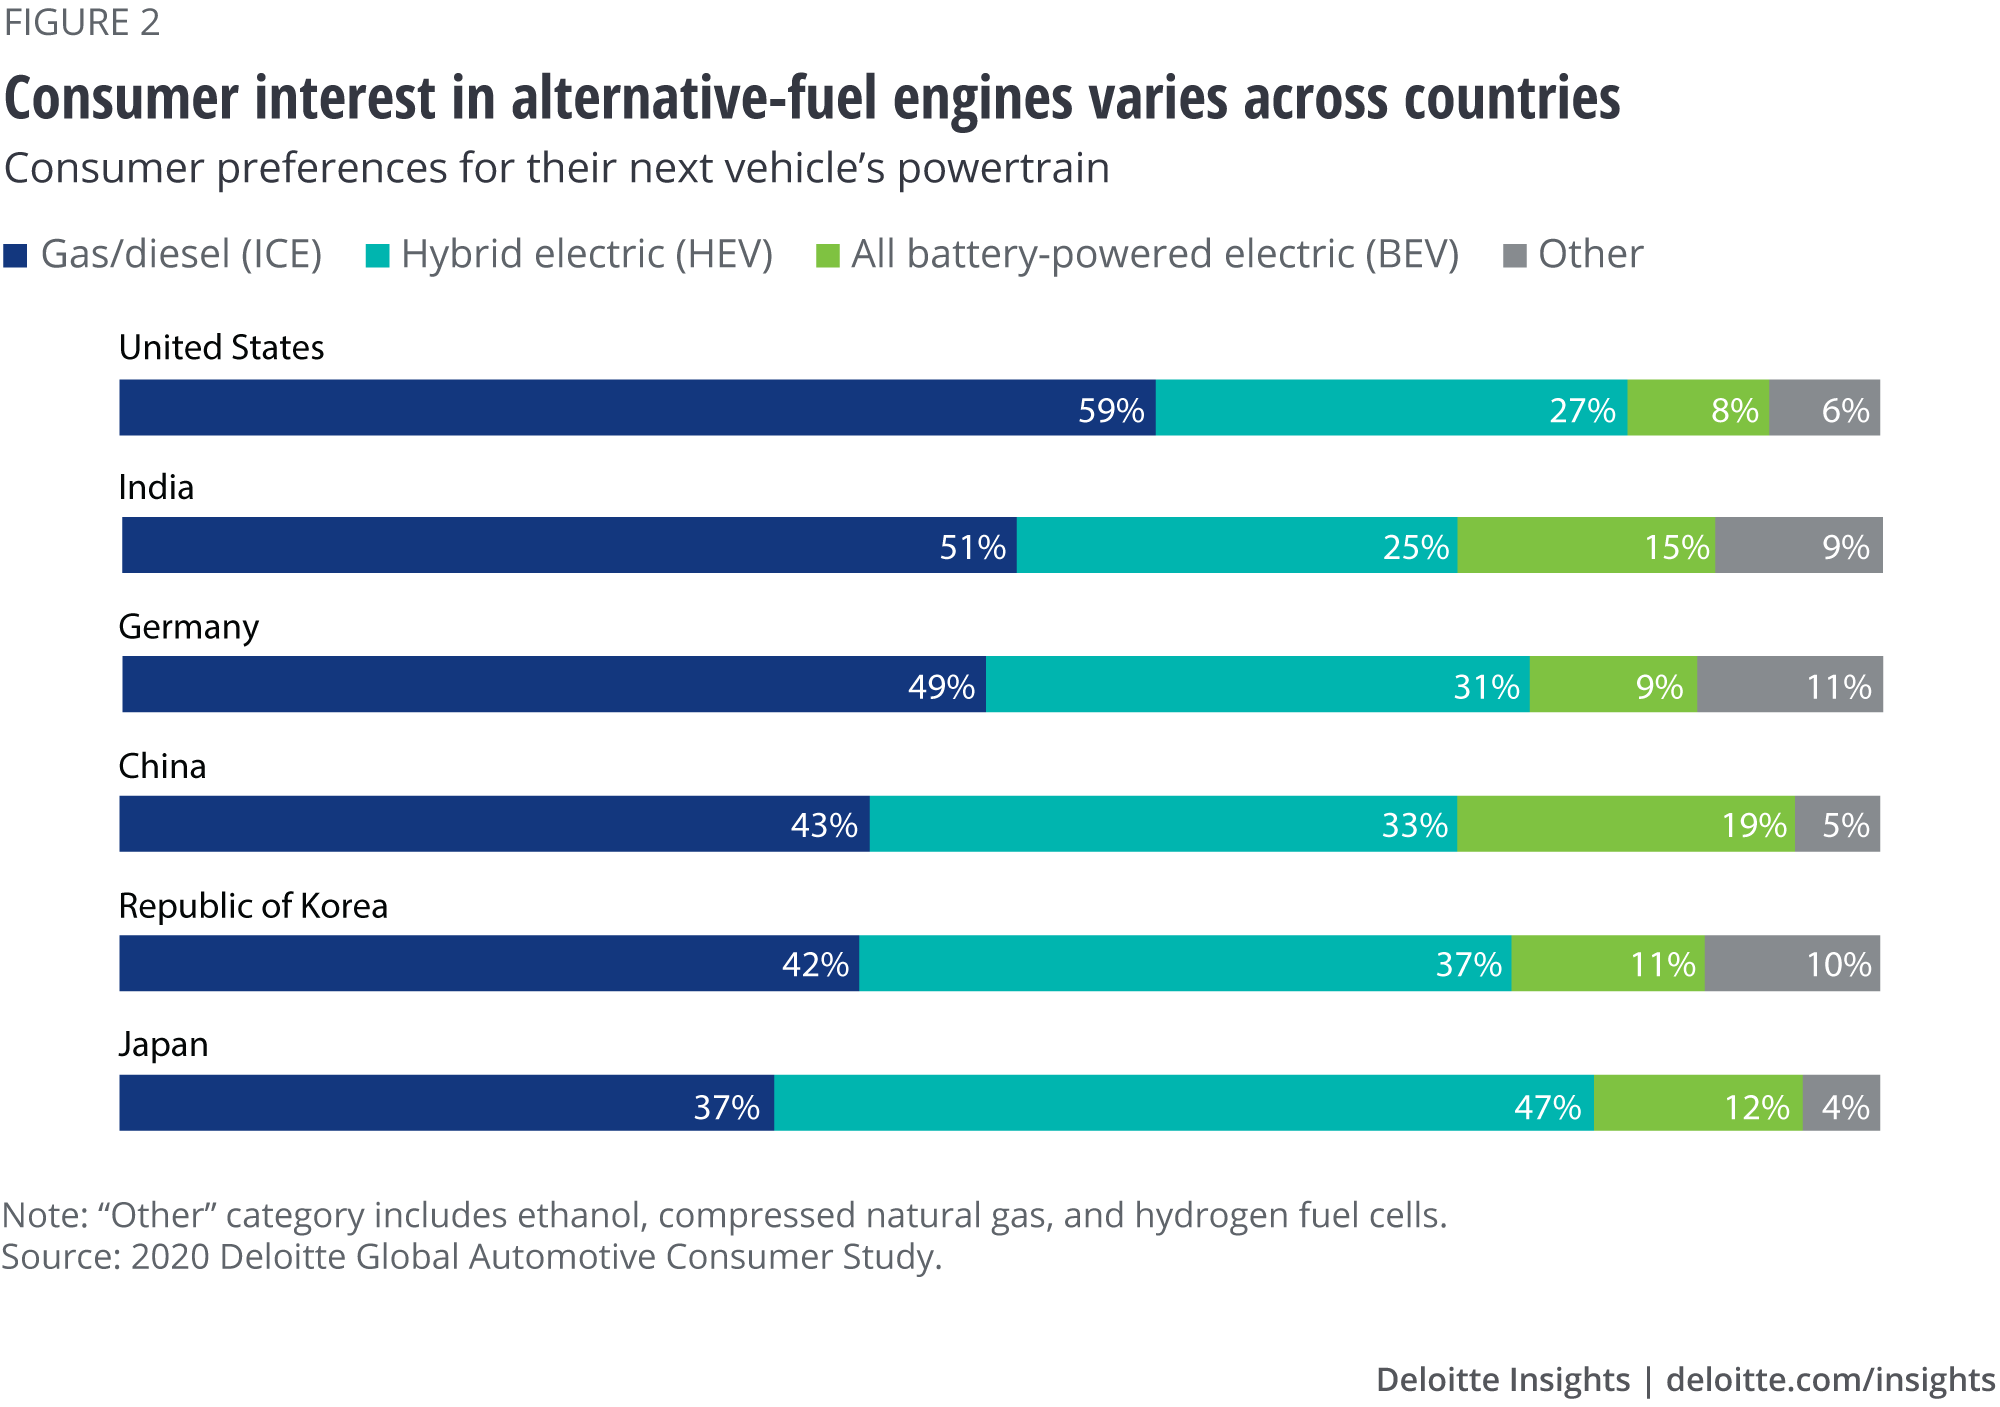 Consumer interest in alternative-fuel engines varies across countries